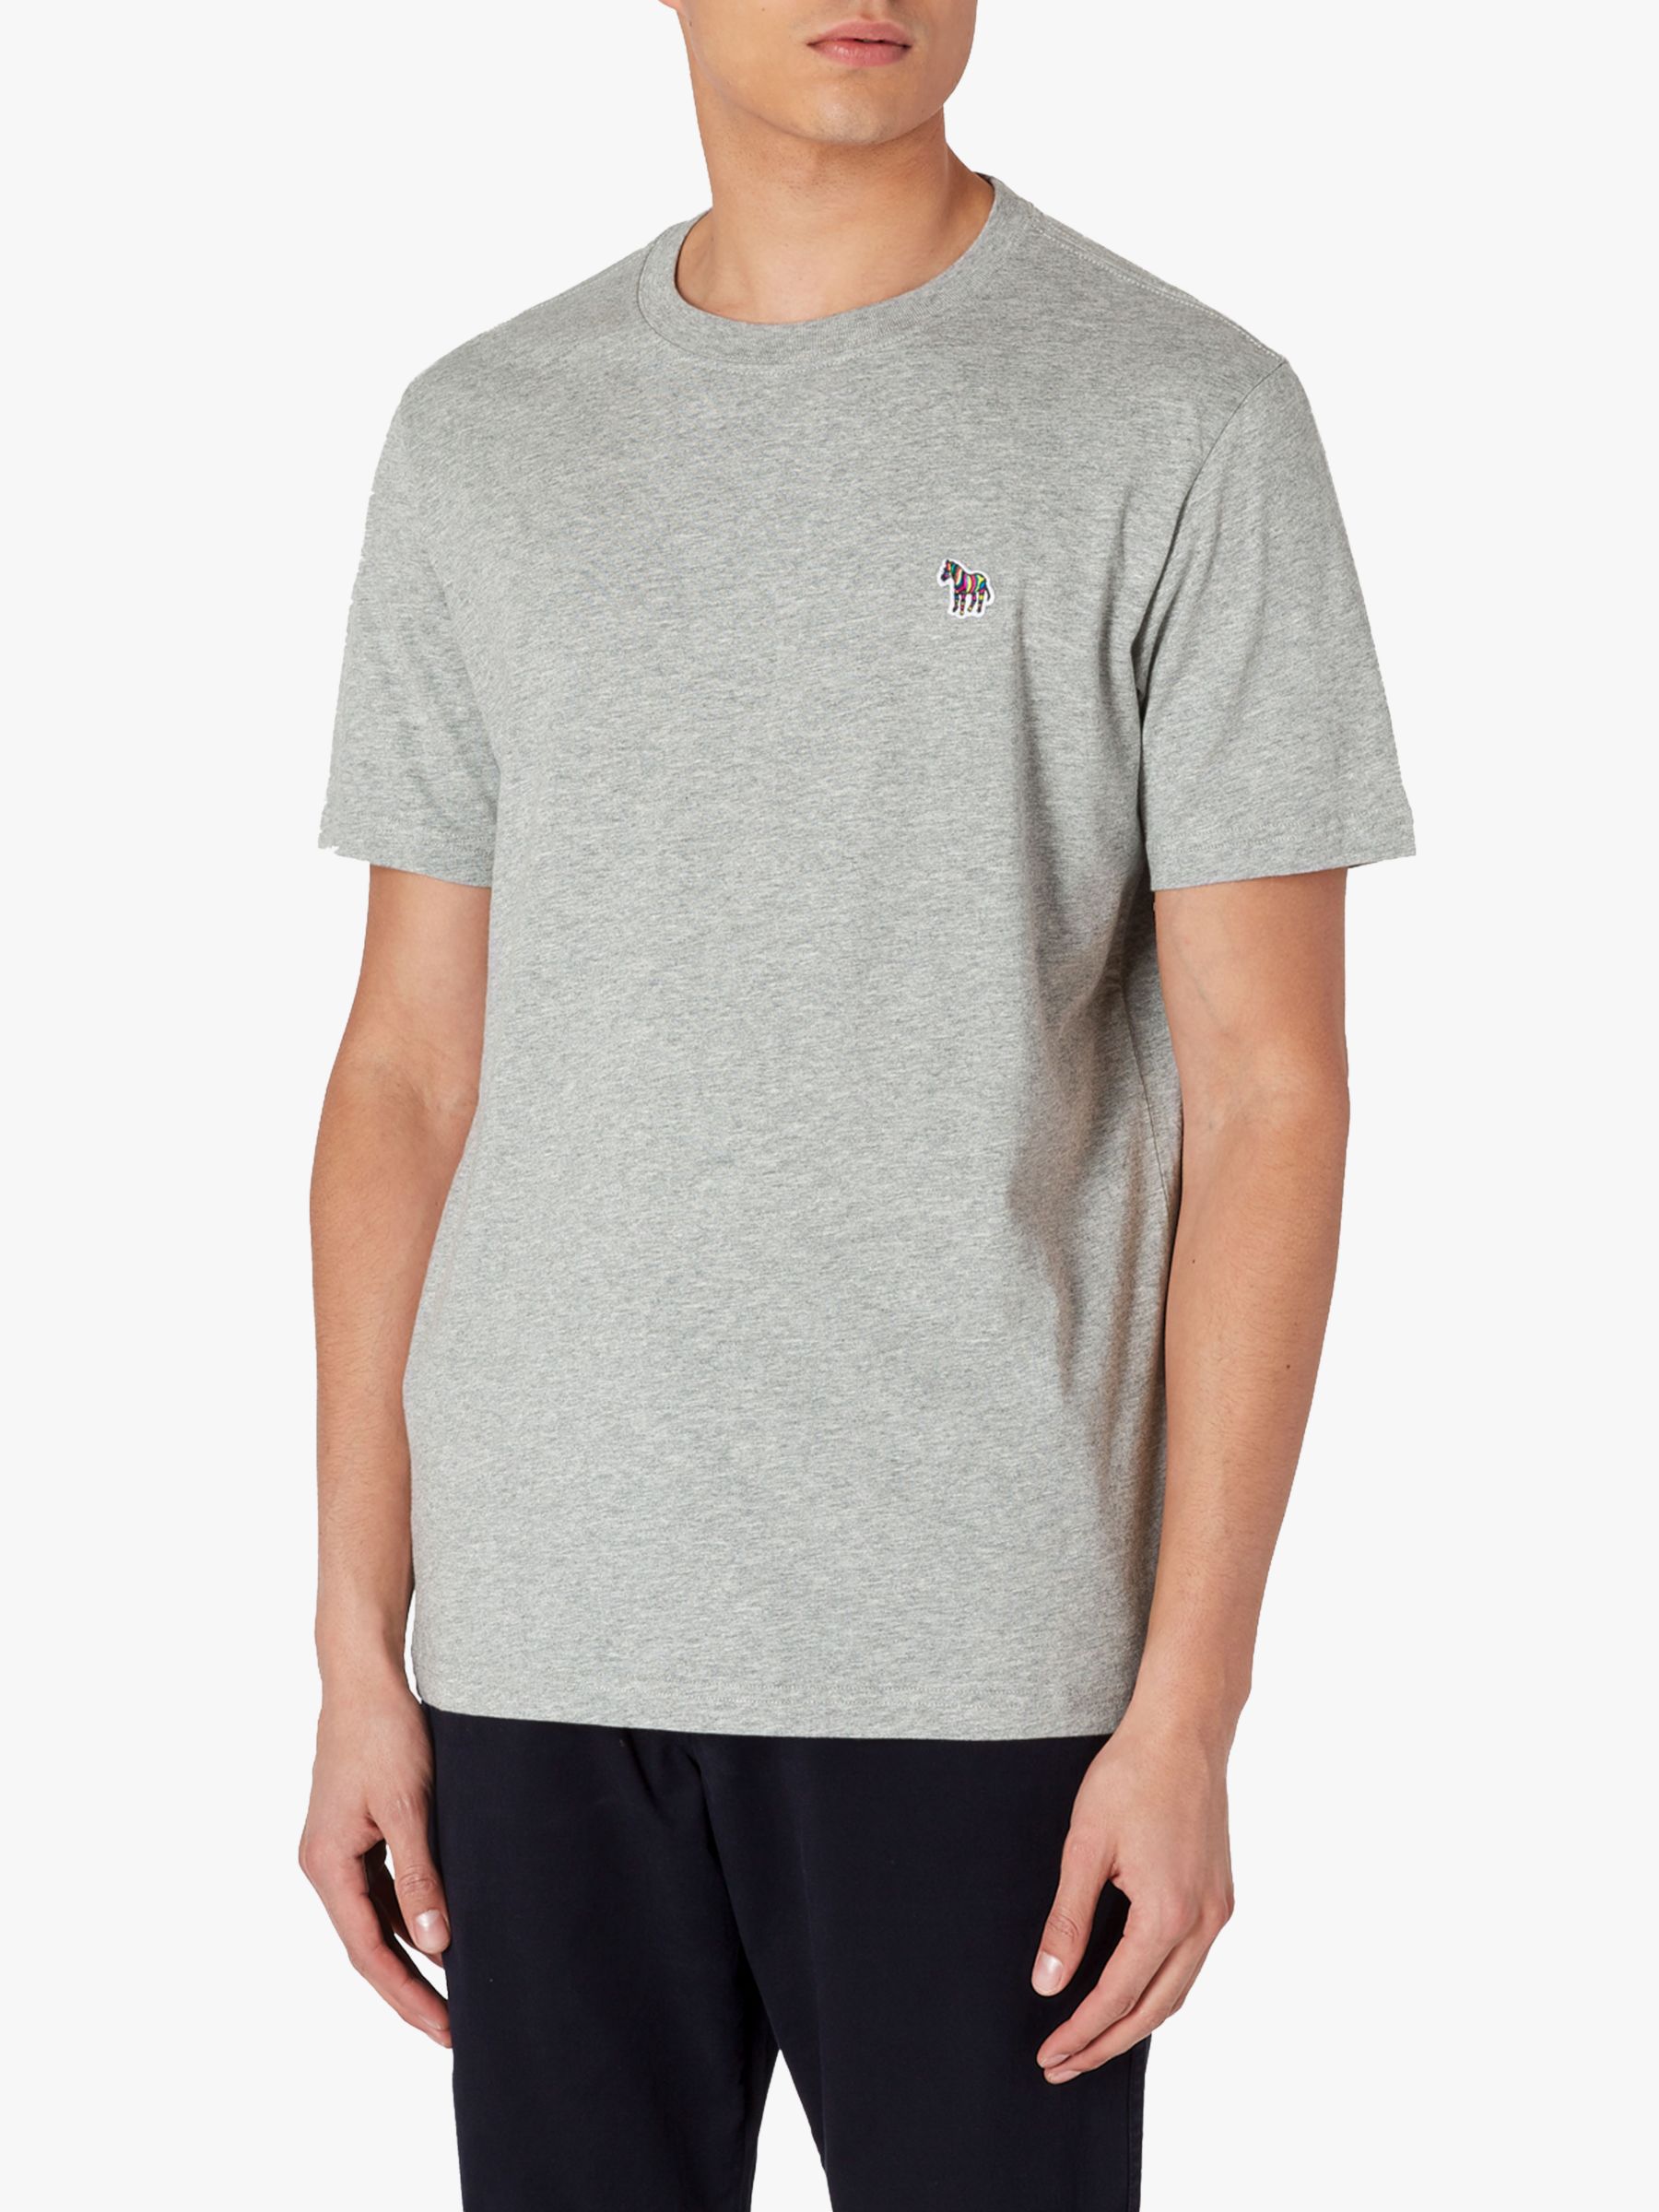 Paul Smith | T-Shirts | Lewis & Partners